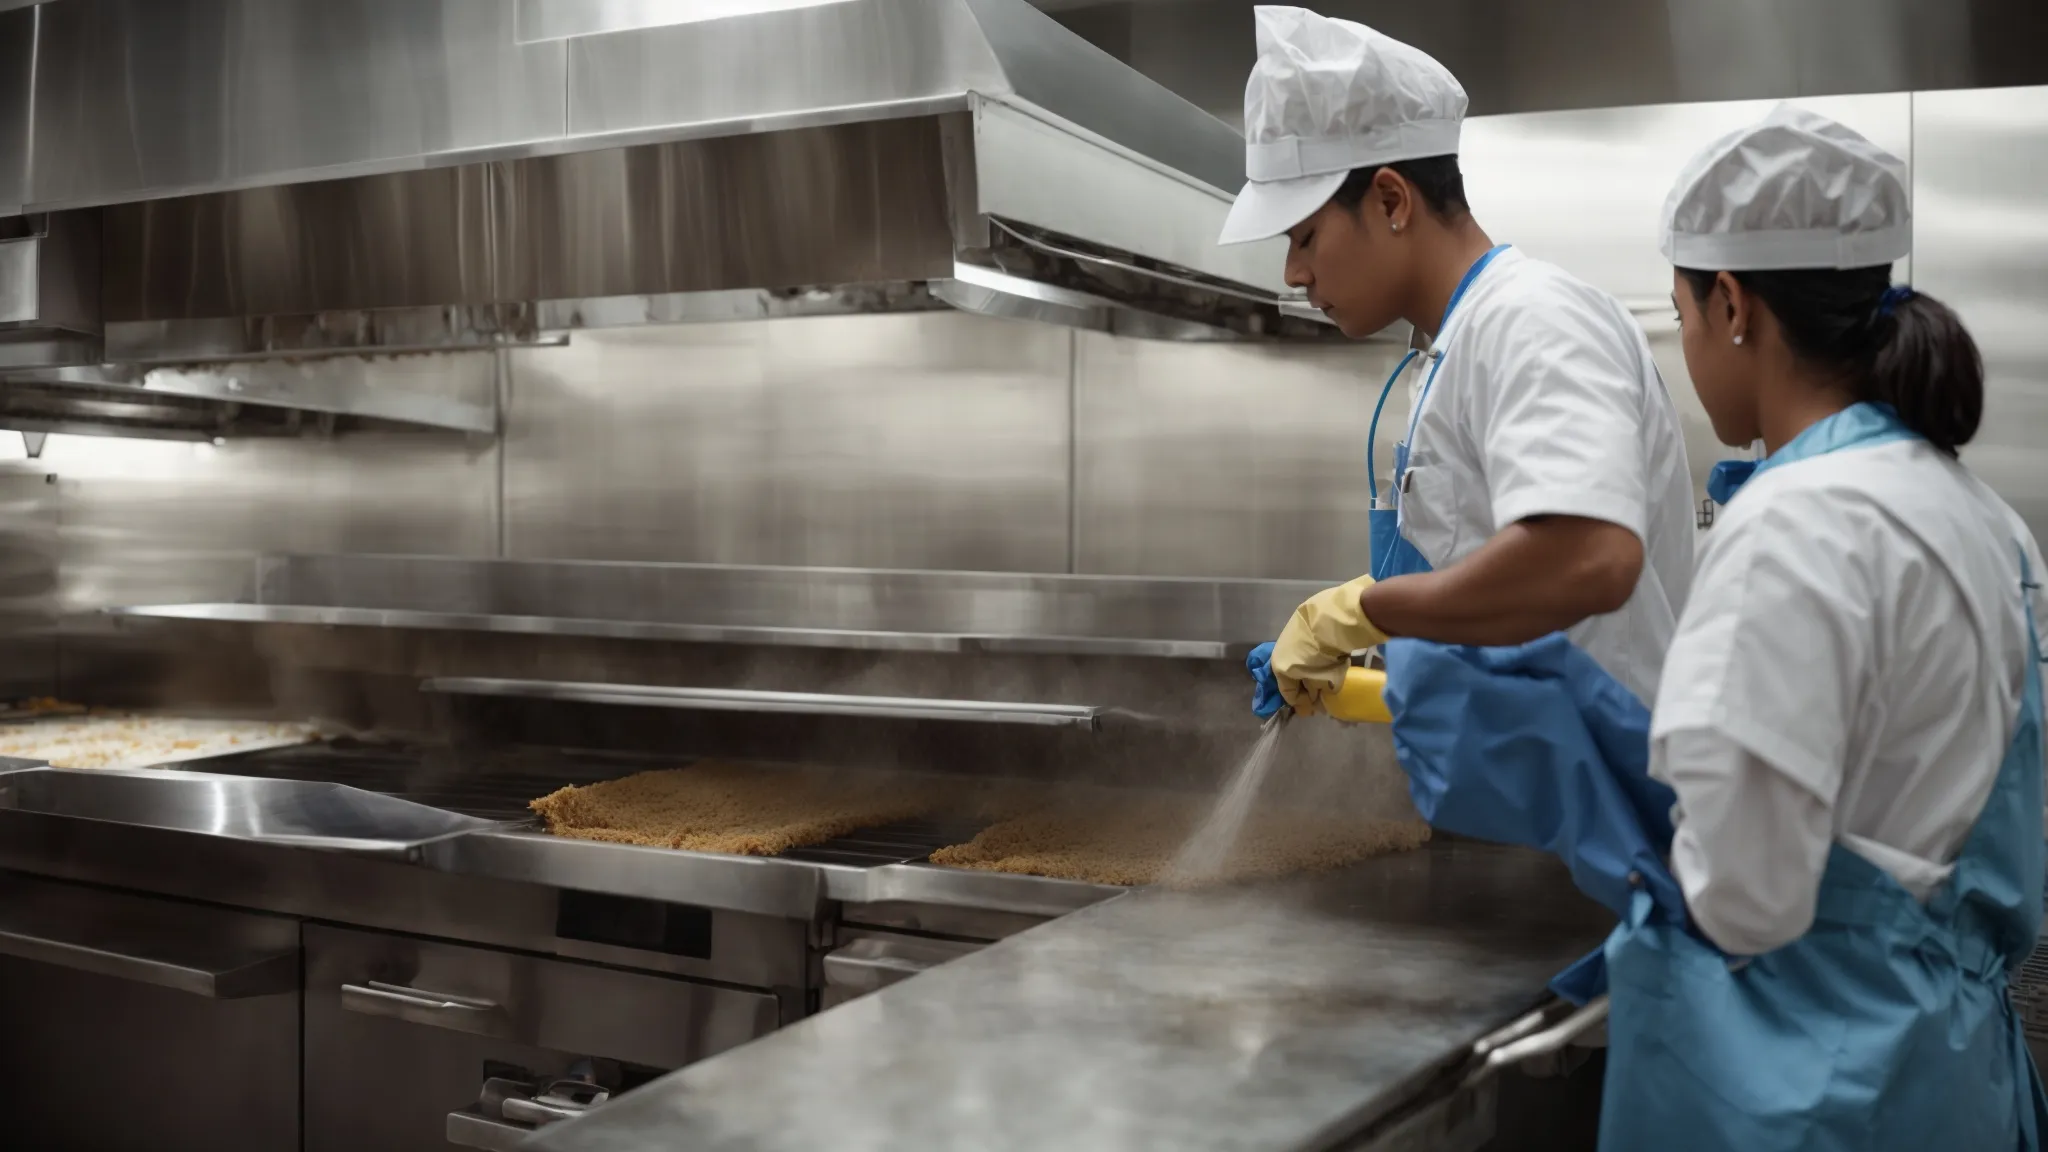 a professional cleaning team meticulously sprays and scrubs down an industrial kitchen exhaust hood, removing every trace of grease and debris.